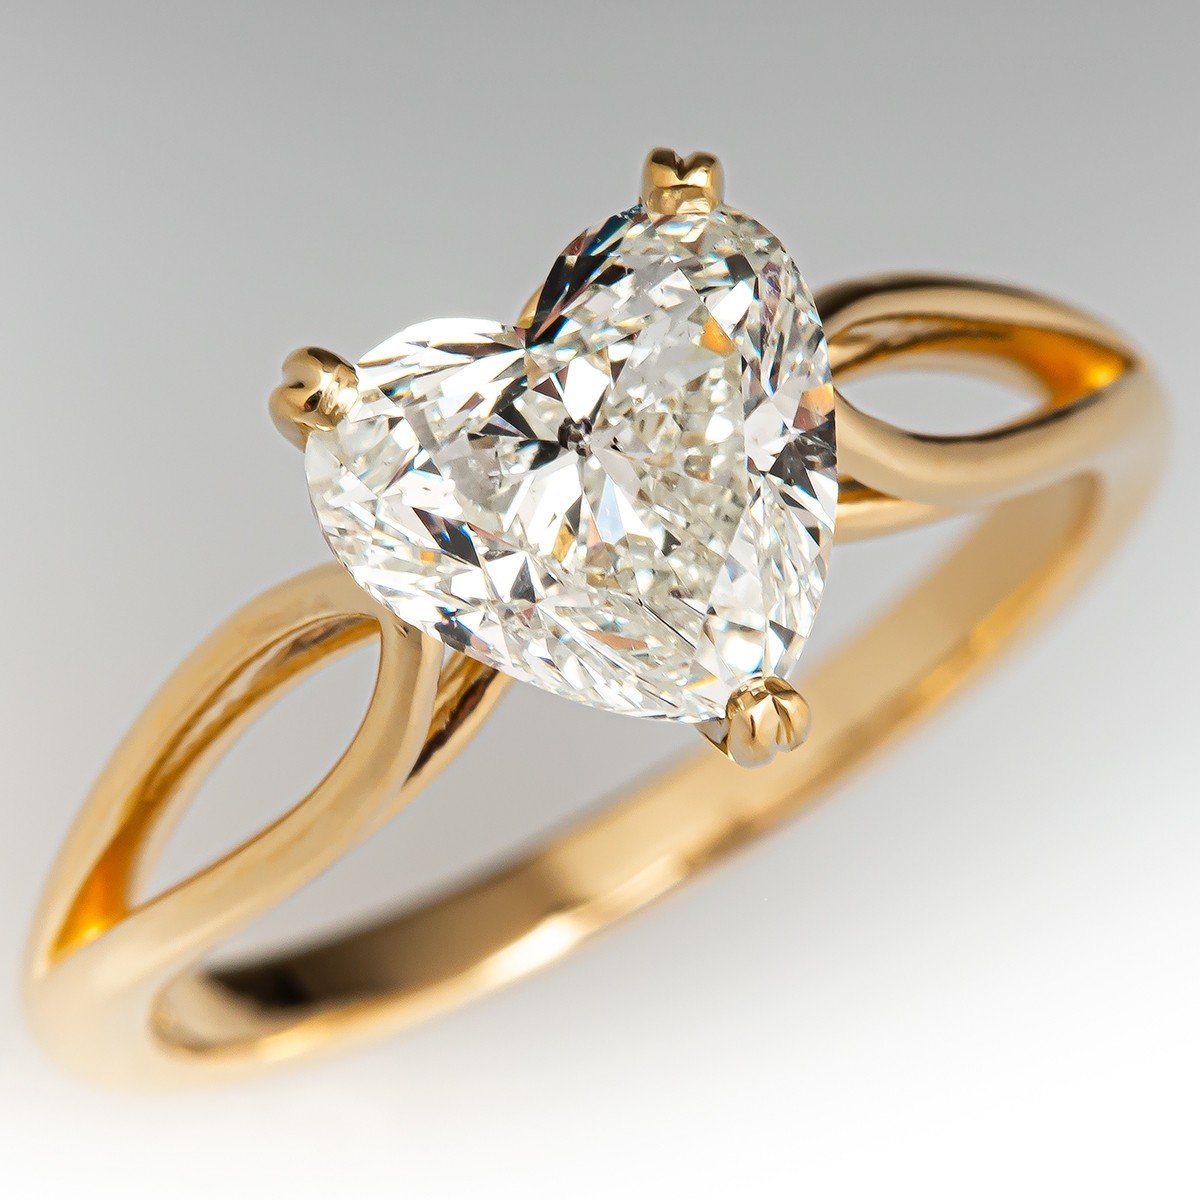 18K Yellow Gold Halo Engagement Ring